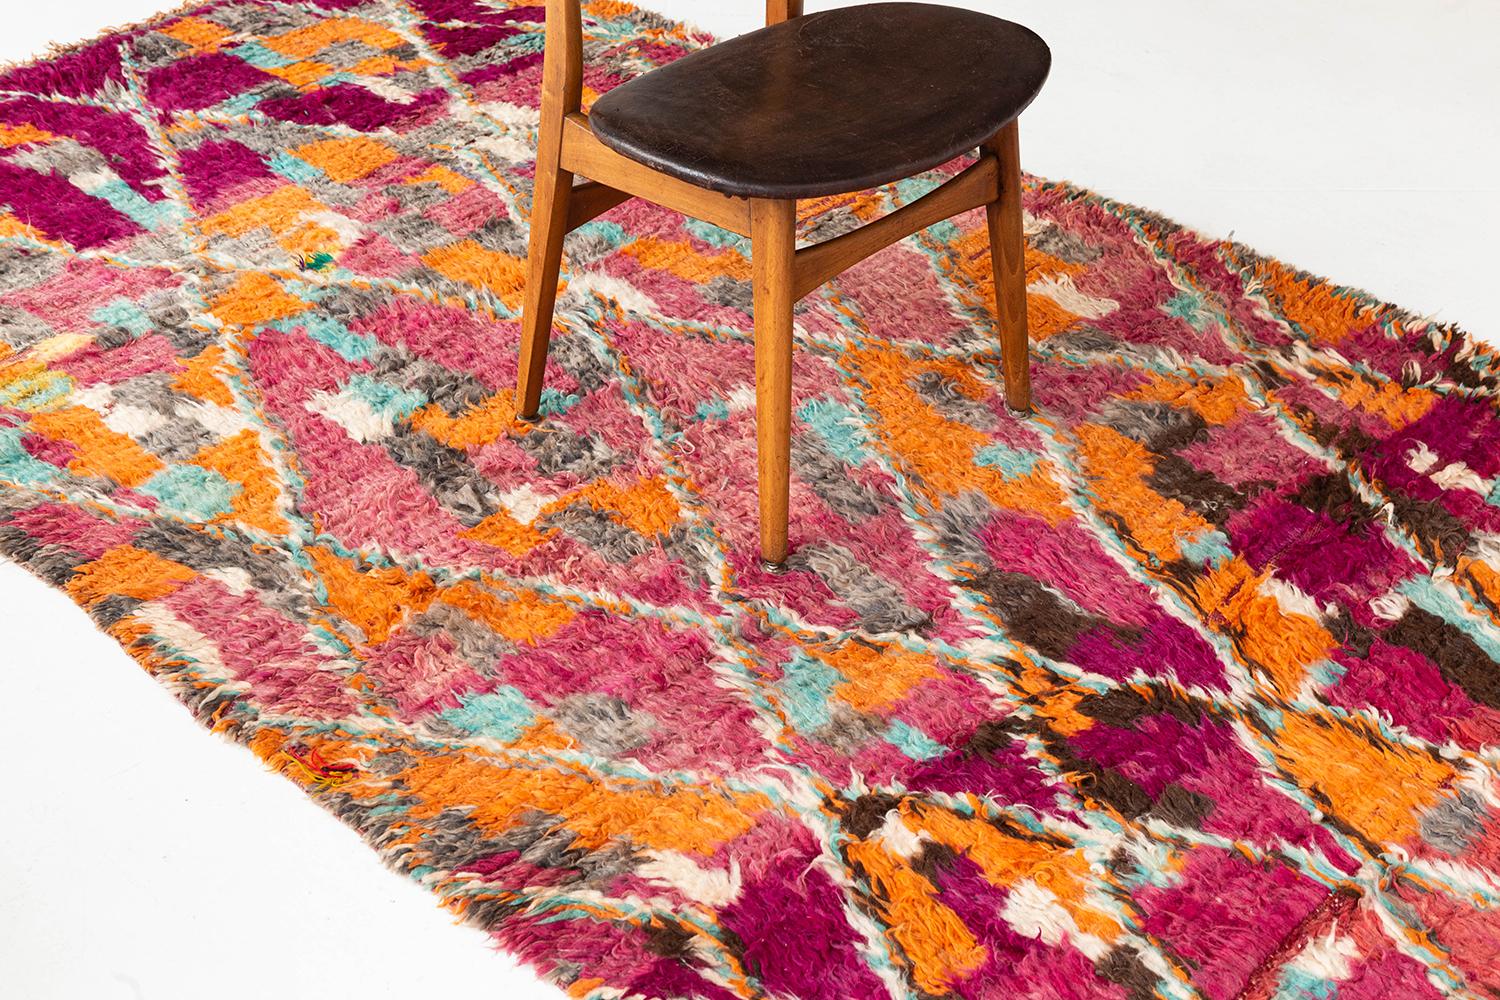 A bold a lively vintage Moroccan from the High Atlas tribes of Morocco. This rug's saturated and cohesive colors makes for the perfect vintage piece. Handwoven tribal elements and symbolic designs add to the rug's uniqueness and overall